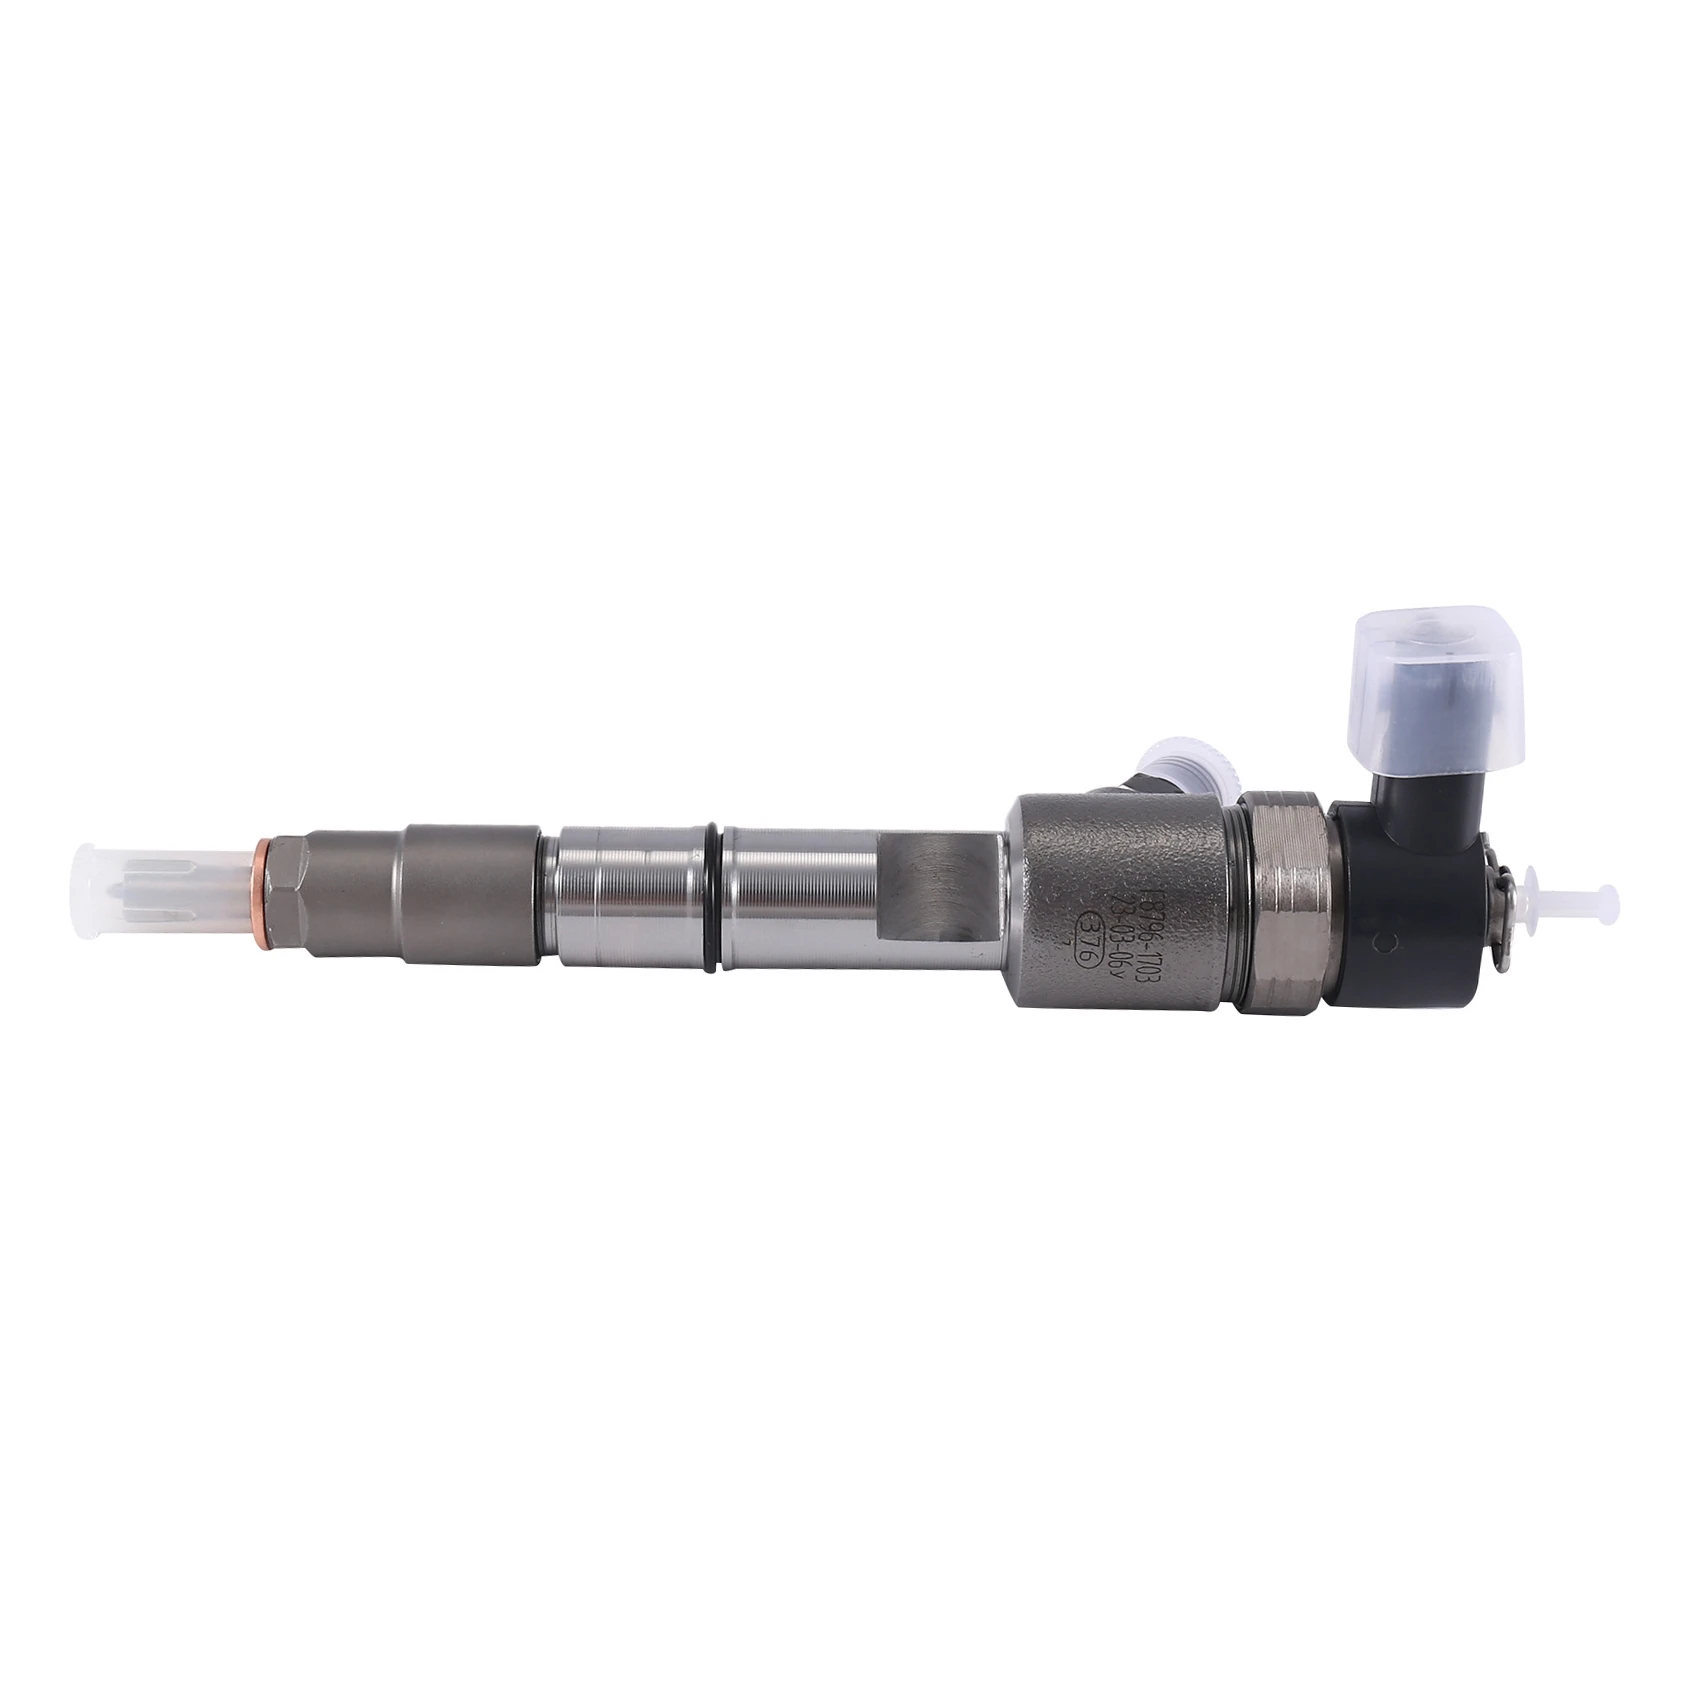 

0445110365 New Diesel Fuel Injector Nozzle for Bosch for JMC 4JB1